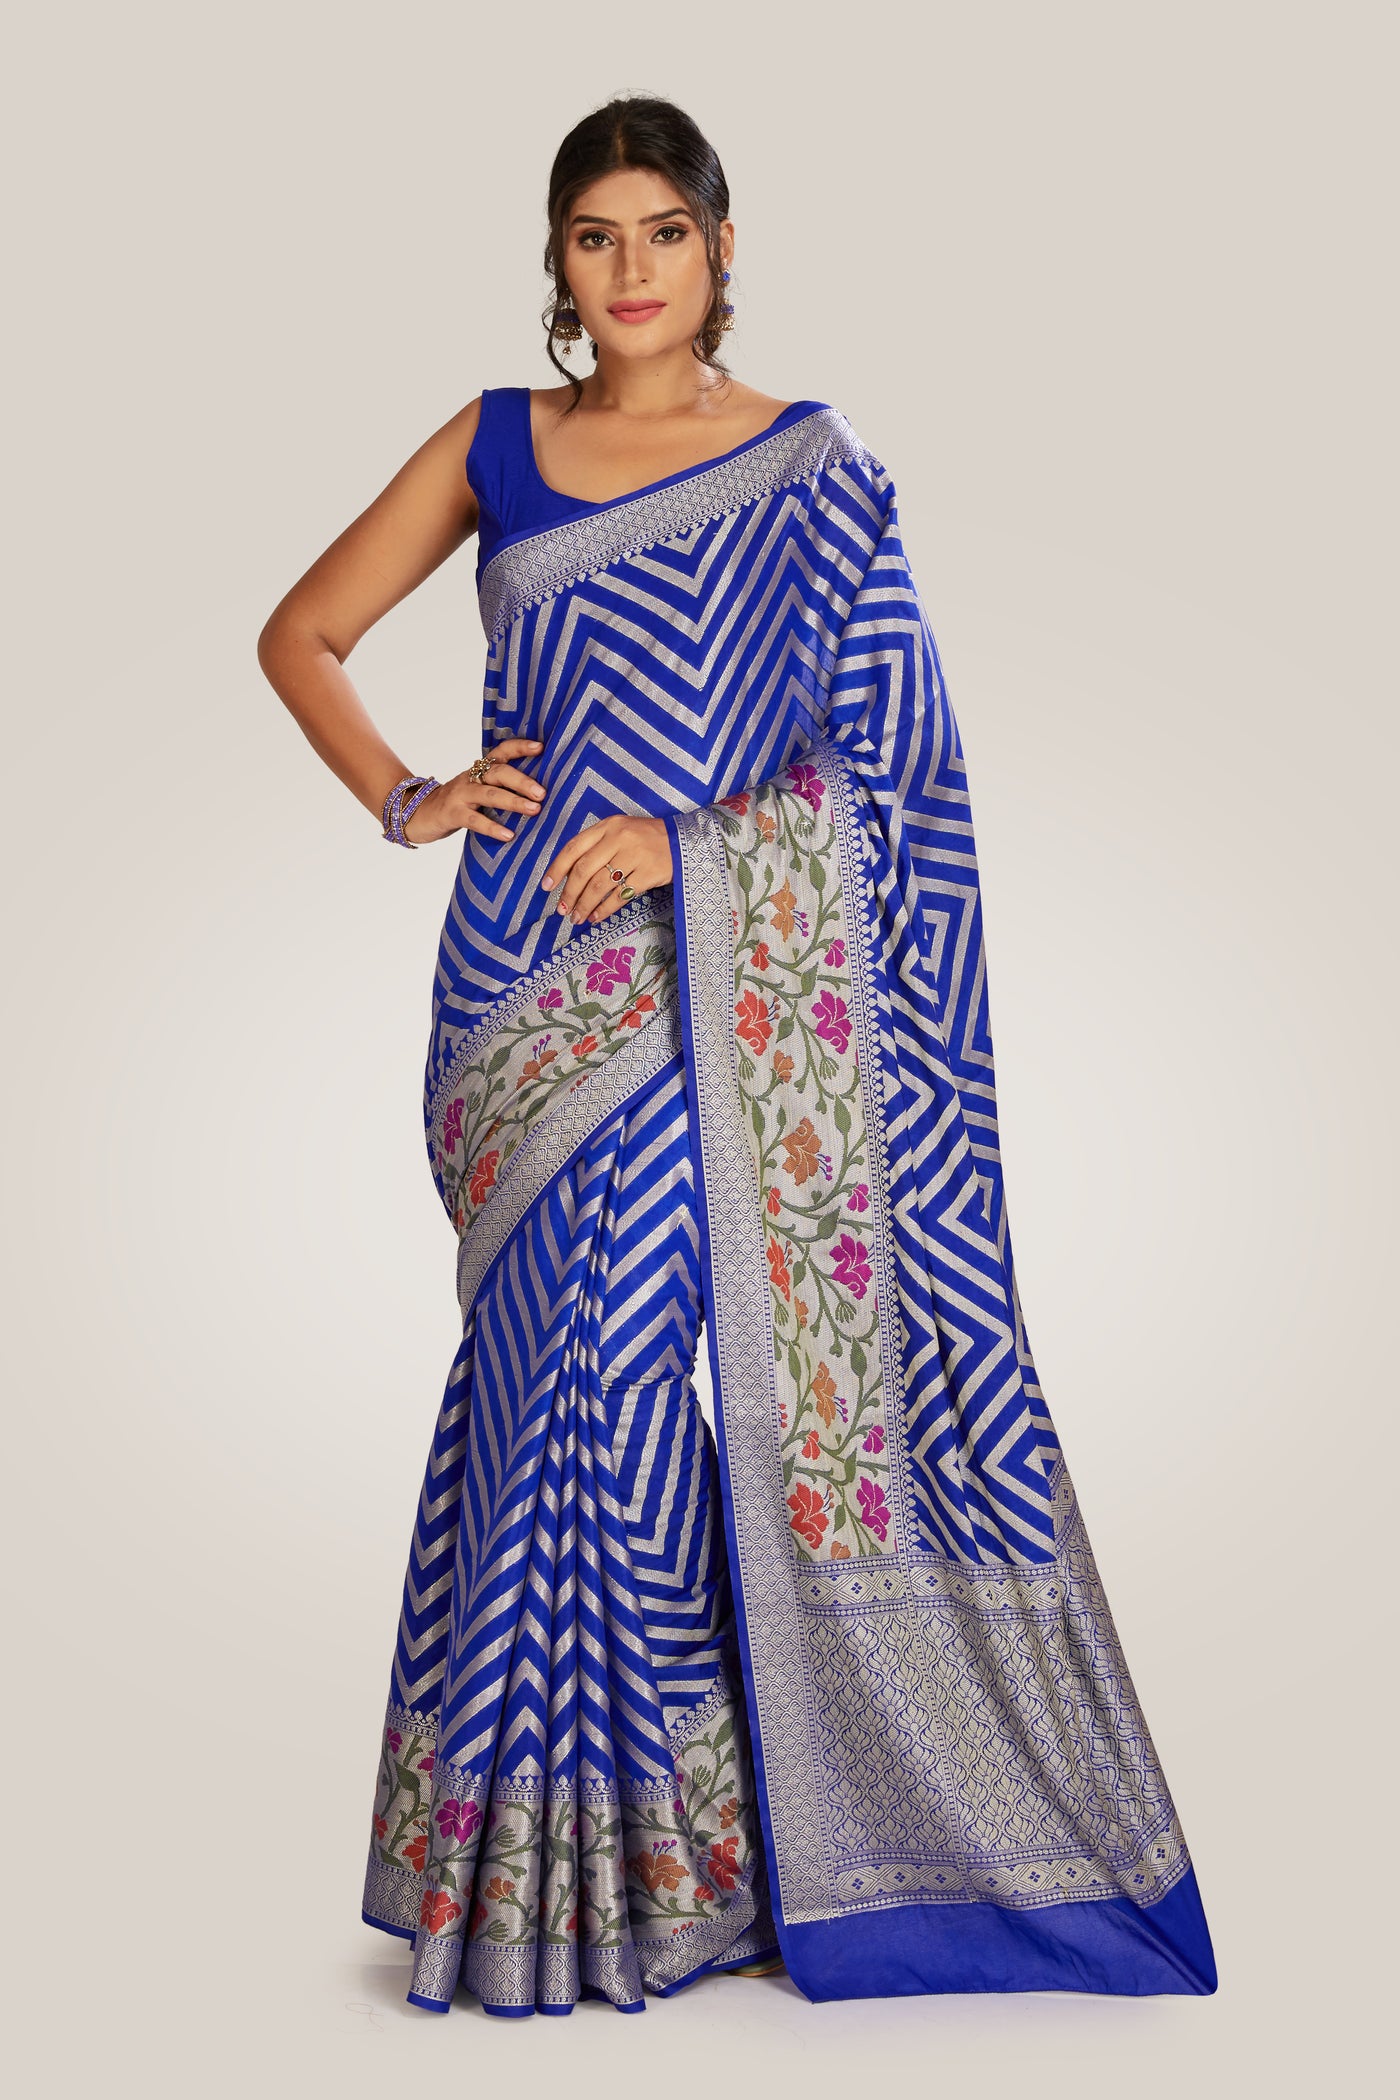 Zig Zag Saree- Indian Clothing in Denver, CO, Aurora, CO, Boulder, CO, Centennial, CO, Fort Collins, CO, Colorado Springs, CO, Cherry Creek, CO, Highlands Ranch, CO, and Longmont, CO. Nationwide shipping, USA - India Fashion X